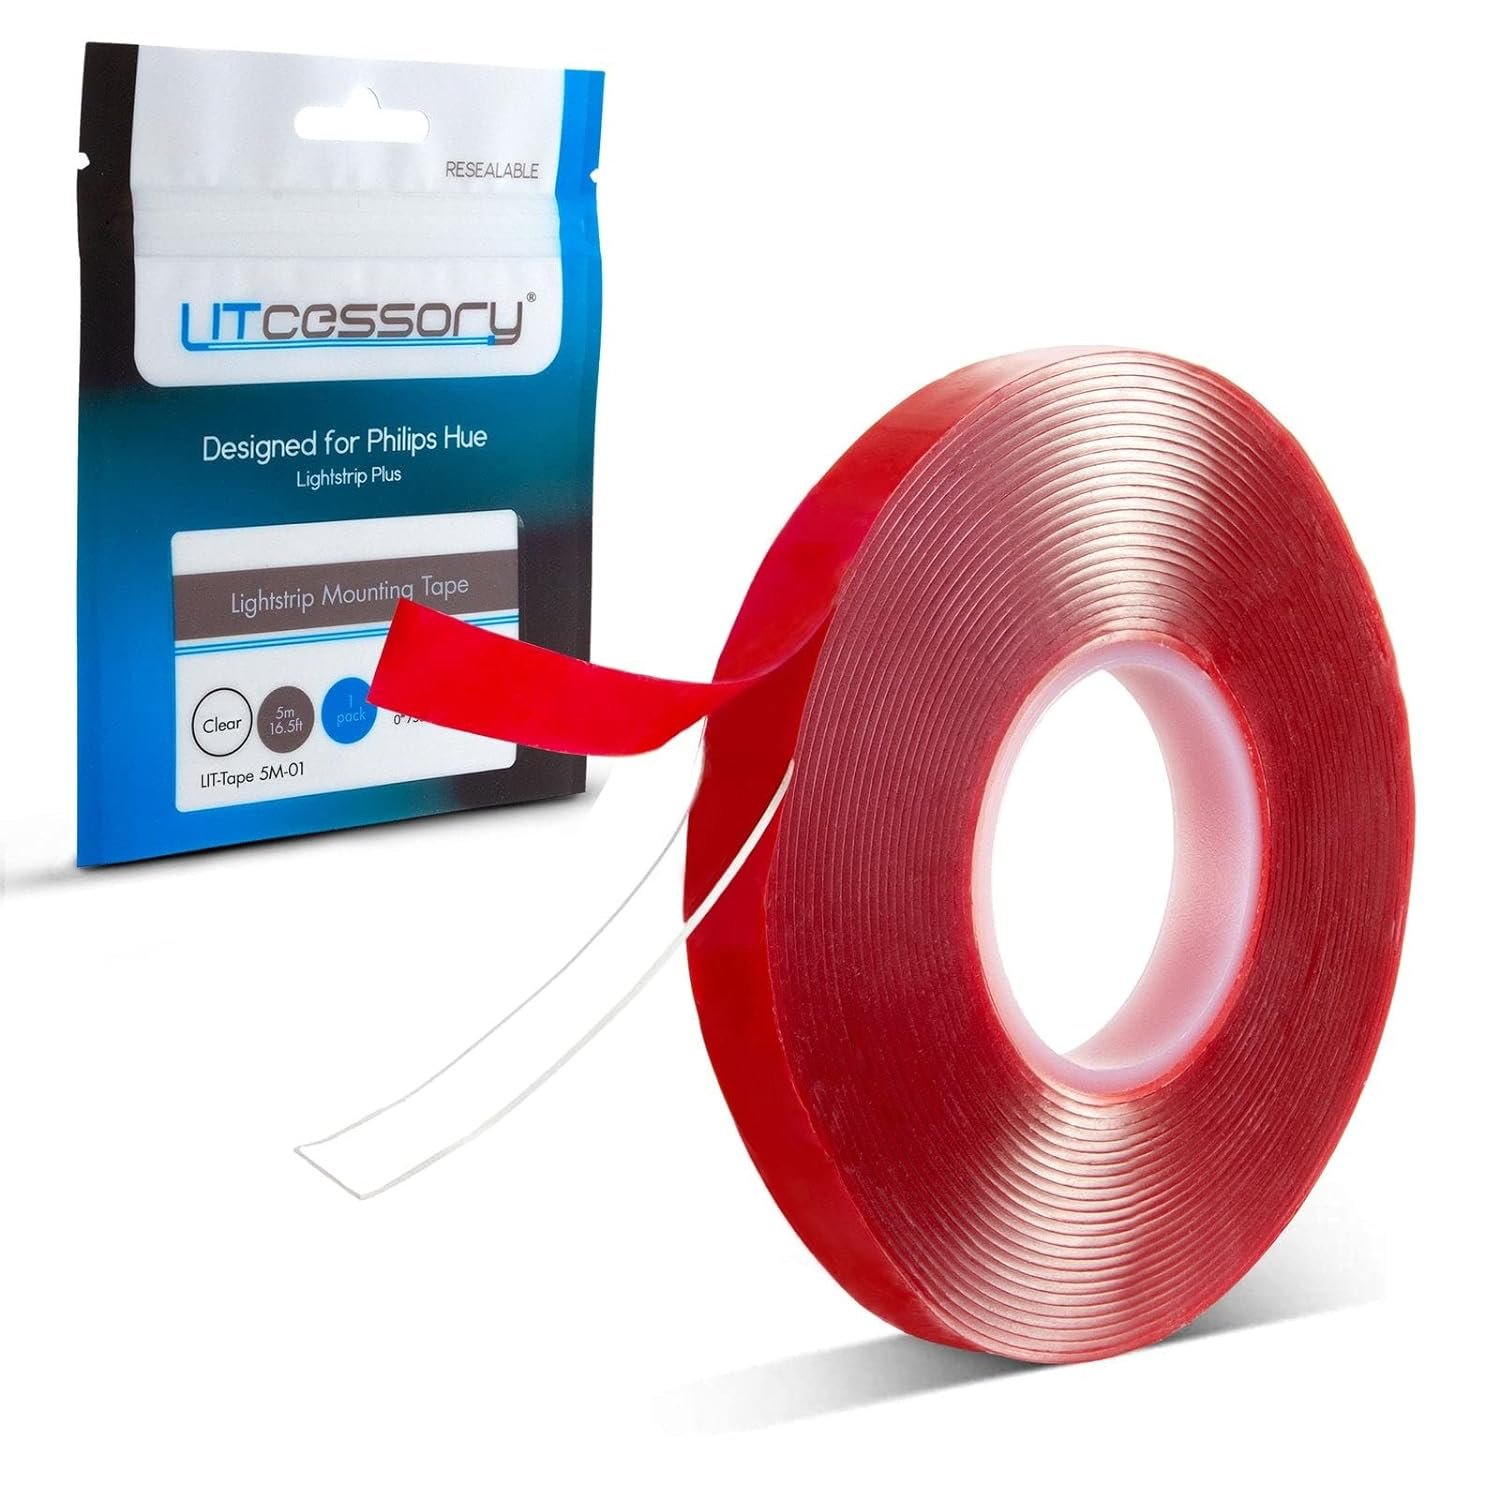 Litcessory Lightstrip Mounting Tape (16ft) for Philips Hue